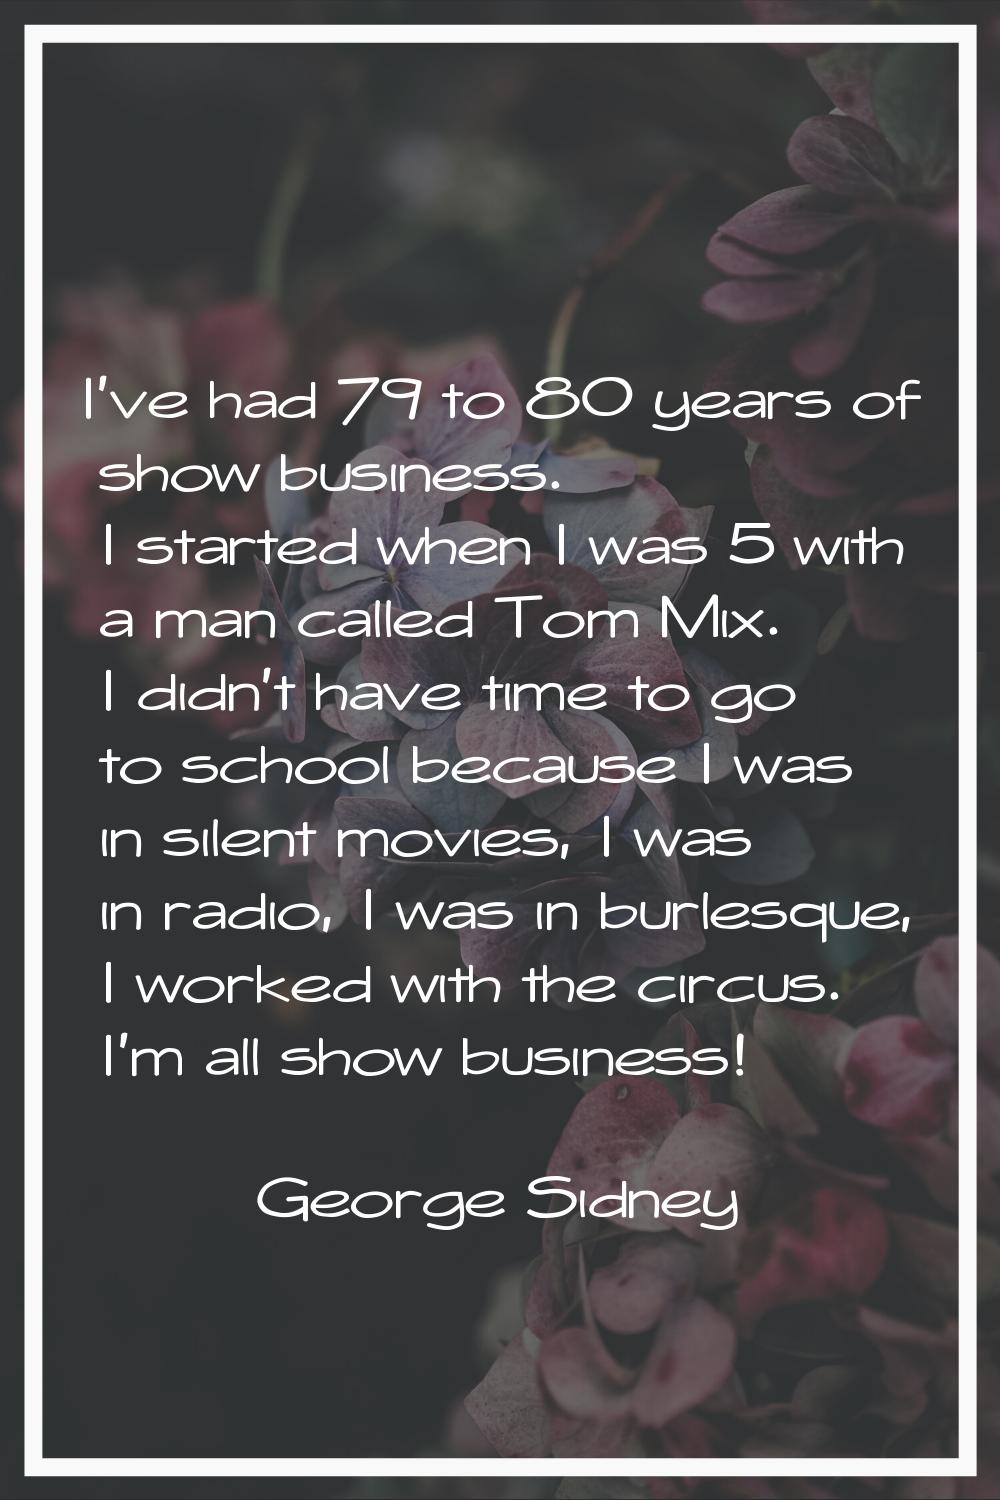 I've had 79 to 80 years of show business. I started when I was 5 with a man called Tom Mix. I didn'